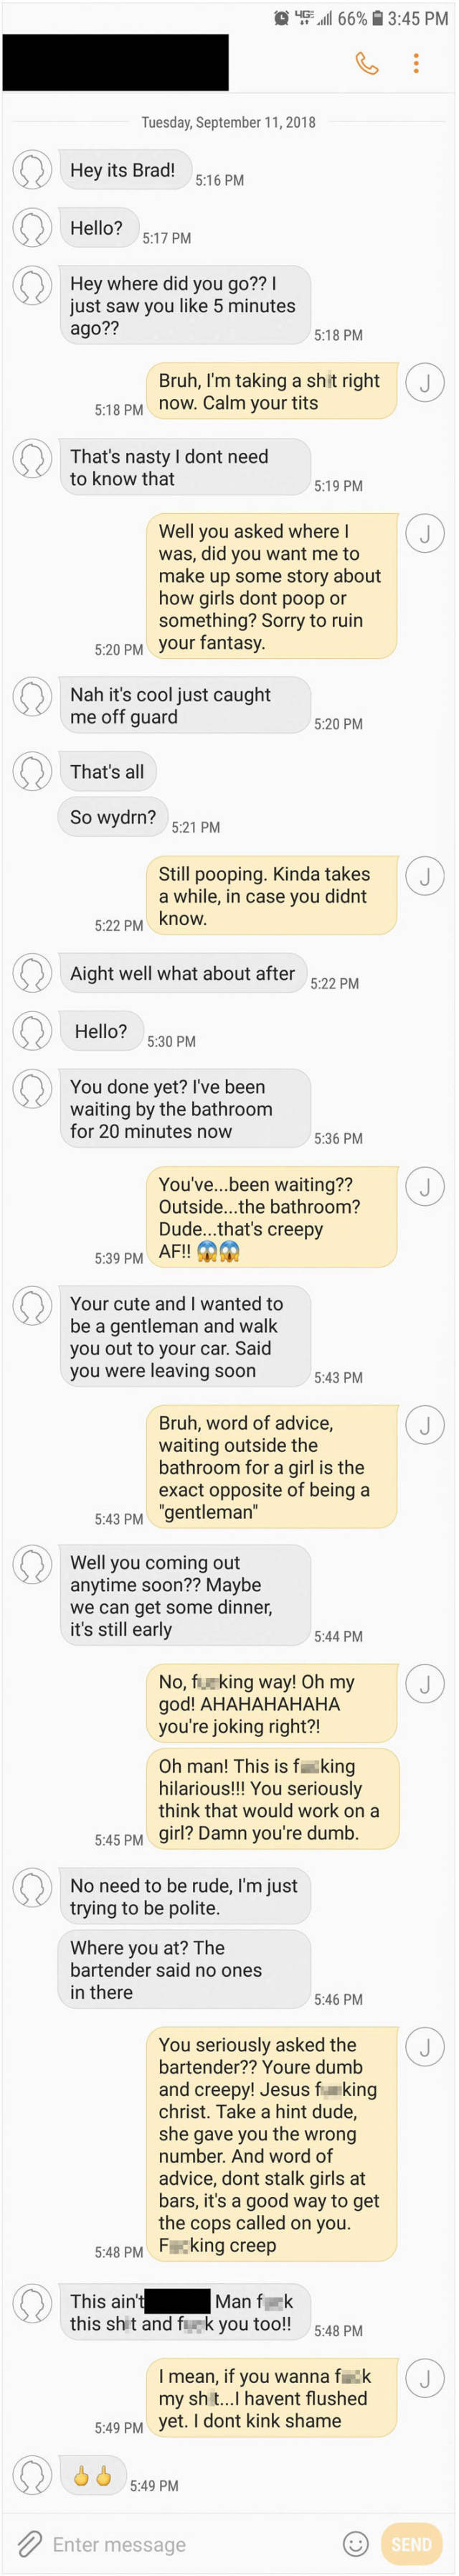 Giving Creeps Your Guy Friend’s Number Is A Real Tactic (4 pics)